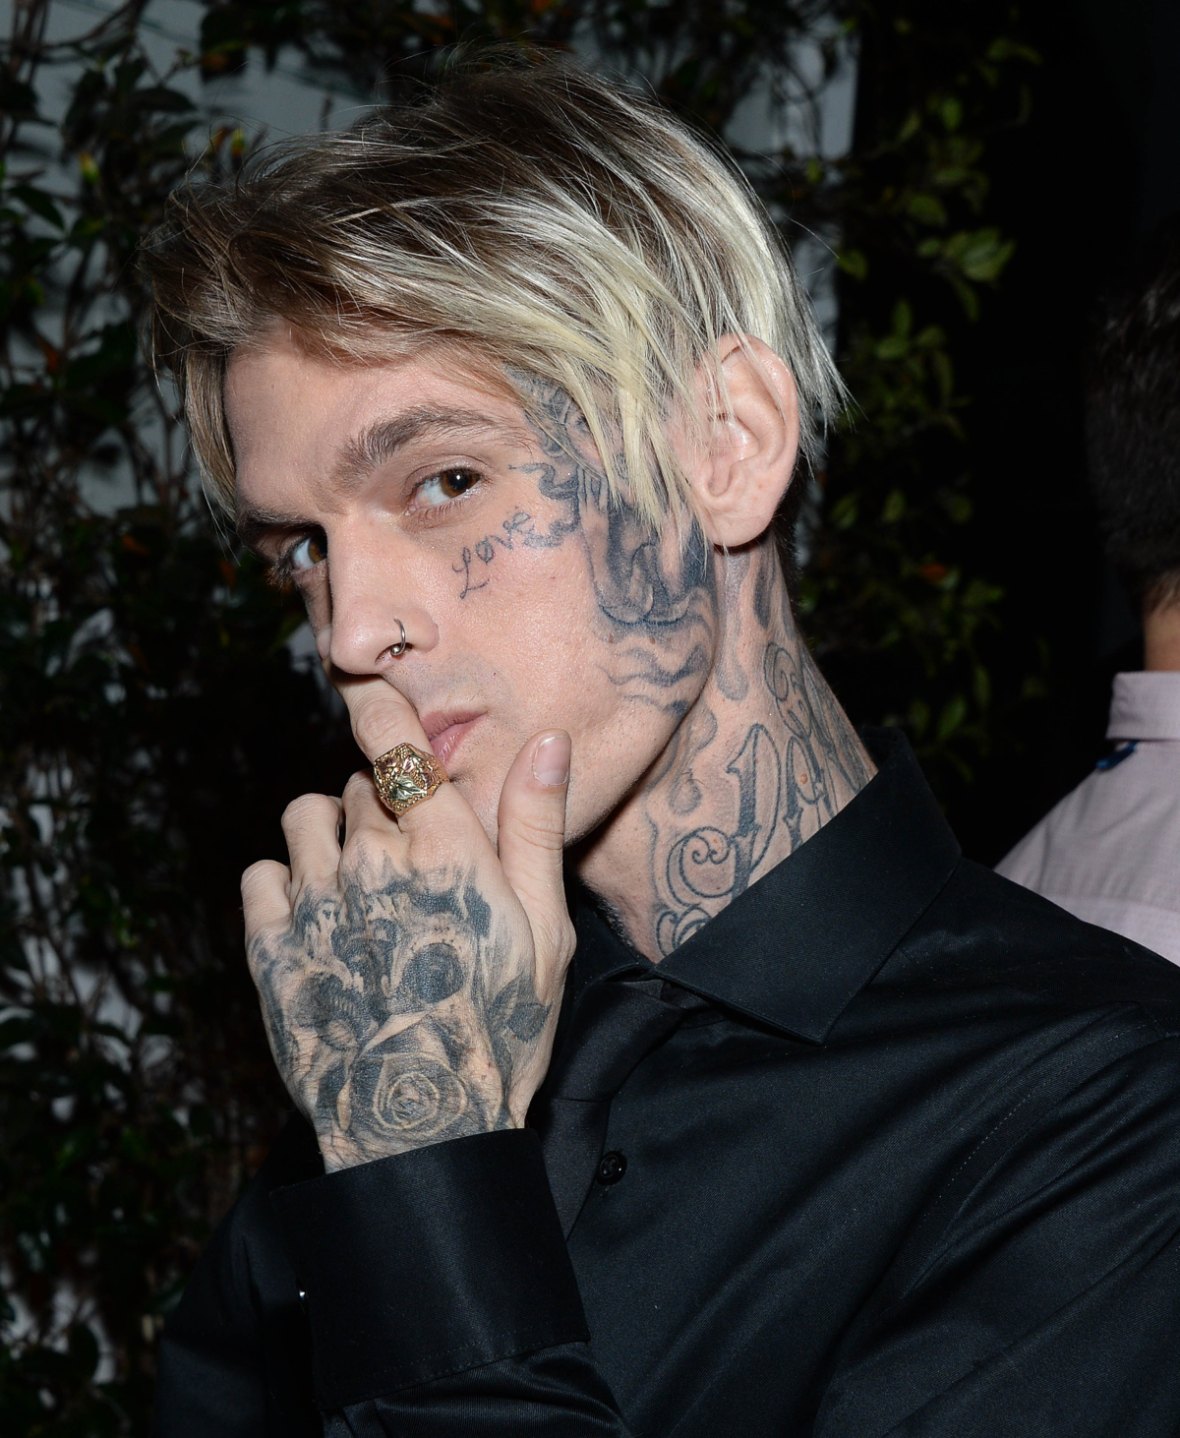 Aaron Carter Face Tattoos Meanings: Why He Got the Ink